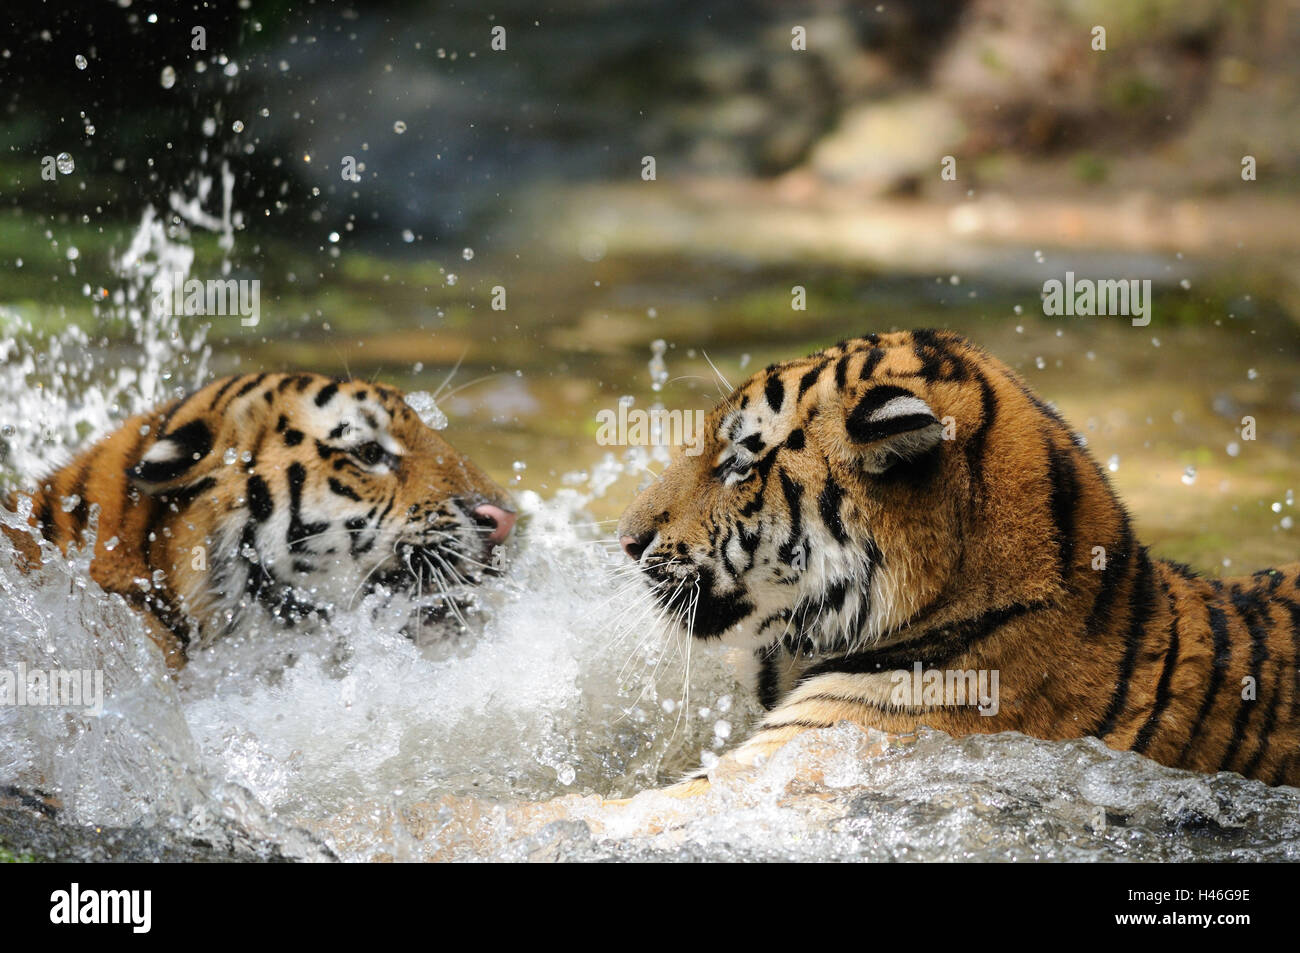 Siberian tigers, Panthera tigris altaica, water, side view, playing, Stock Photo